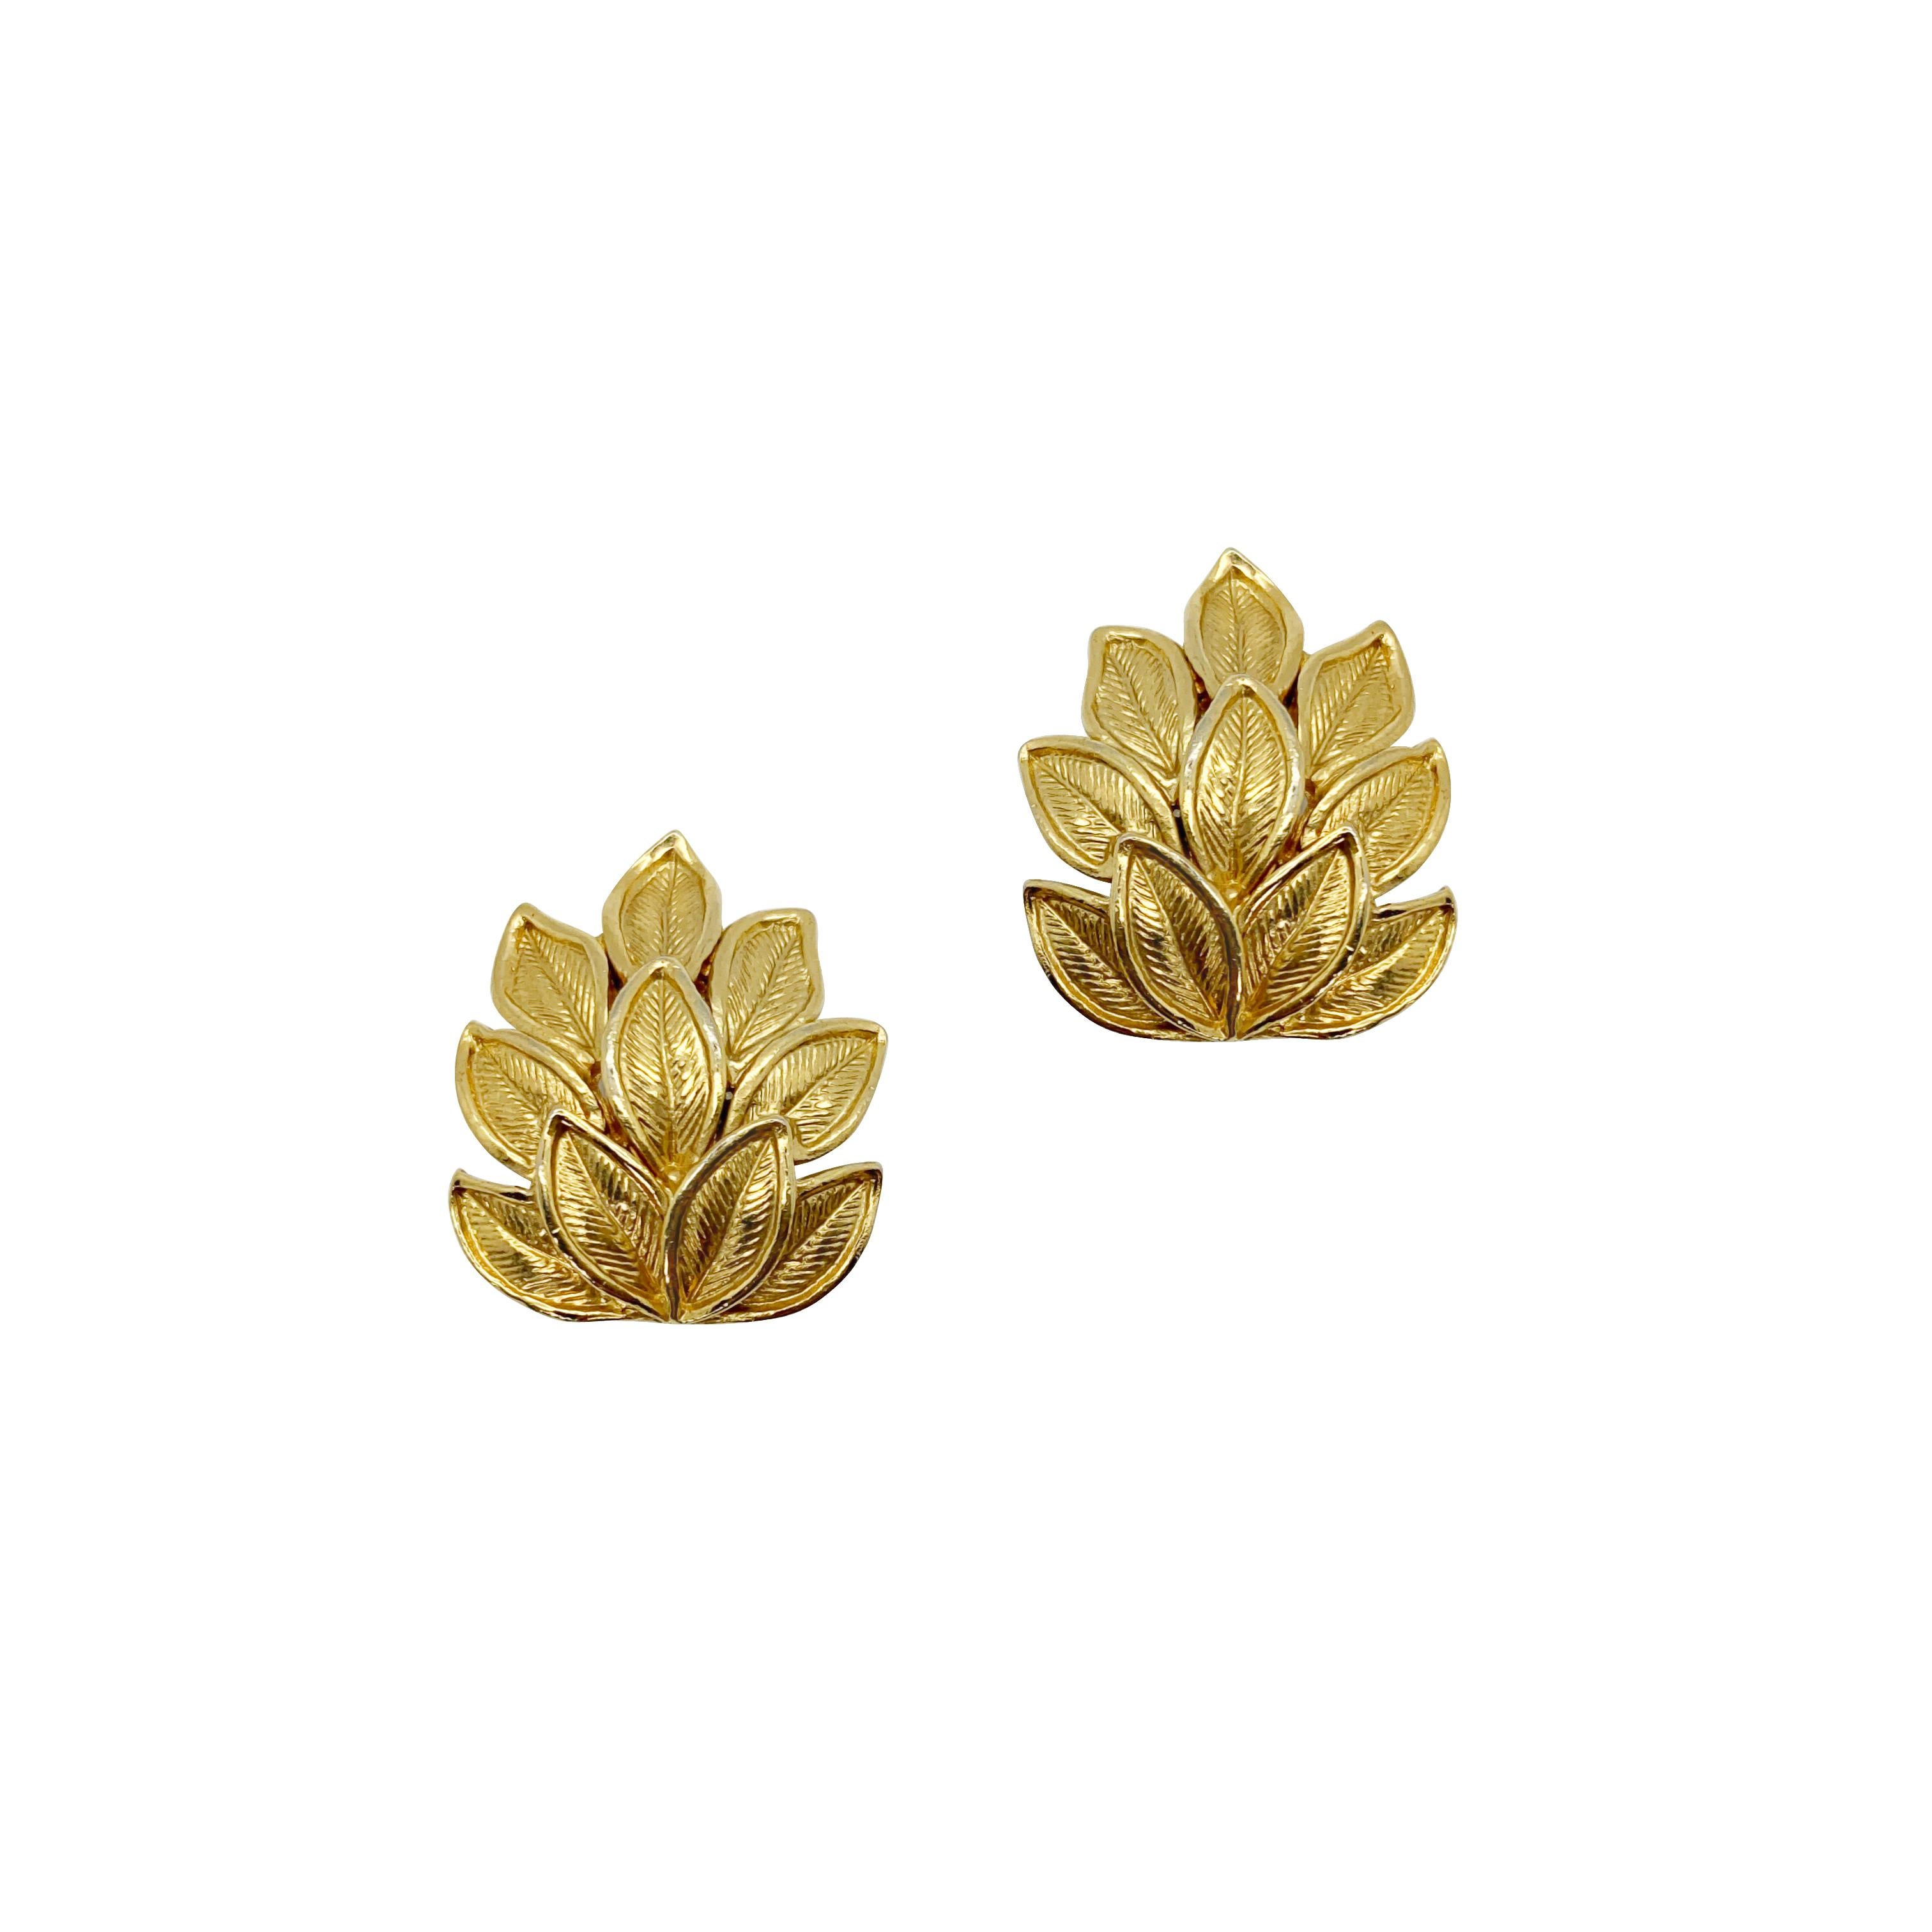 A super stylish pair of vintage Trifari leaf earrings. 
Vintage Condition: Very good without damage or noteworthy wear. 
Materials: Gold plated metal
Signed: Trifari
Fastening: Clip
Approximate Dimensions: 2.5cm
The perfect forever in style